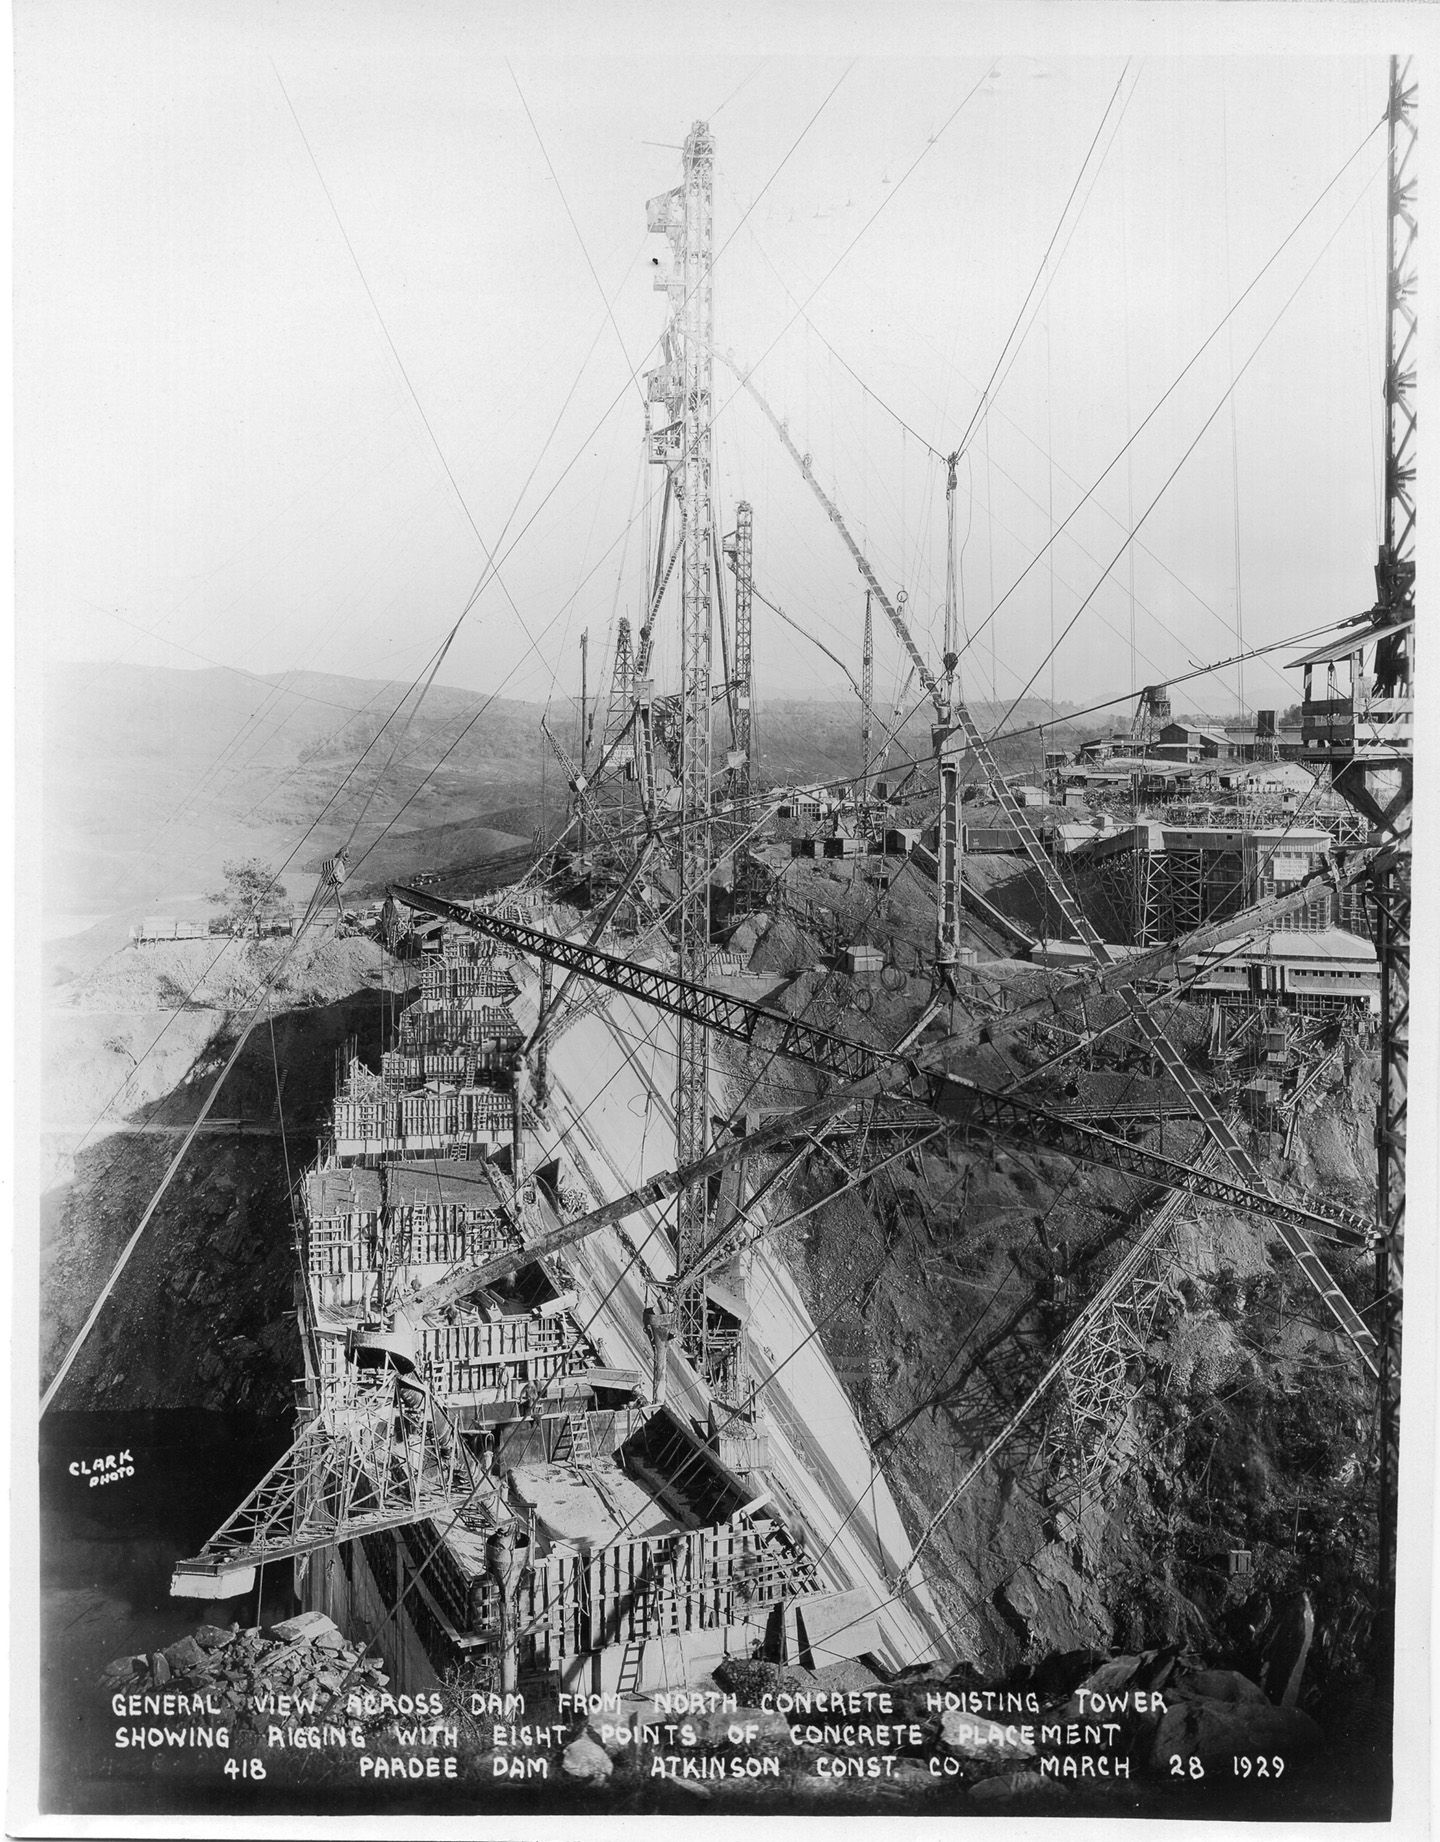 General view across damn from north concrete hoisting tower showing rigging with eight points of concrete placement. (March 1929)	